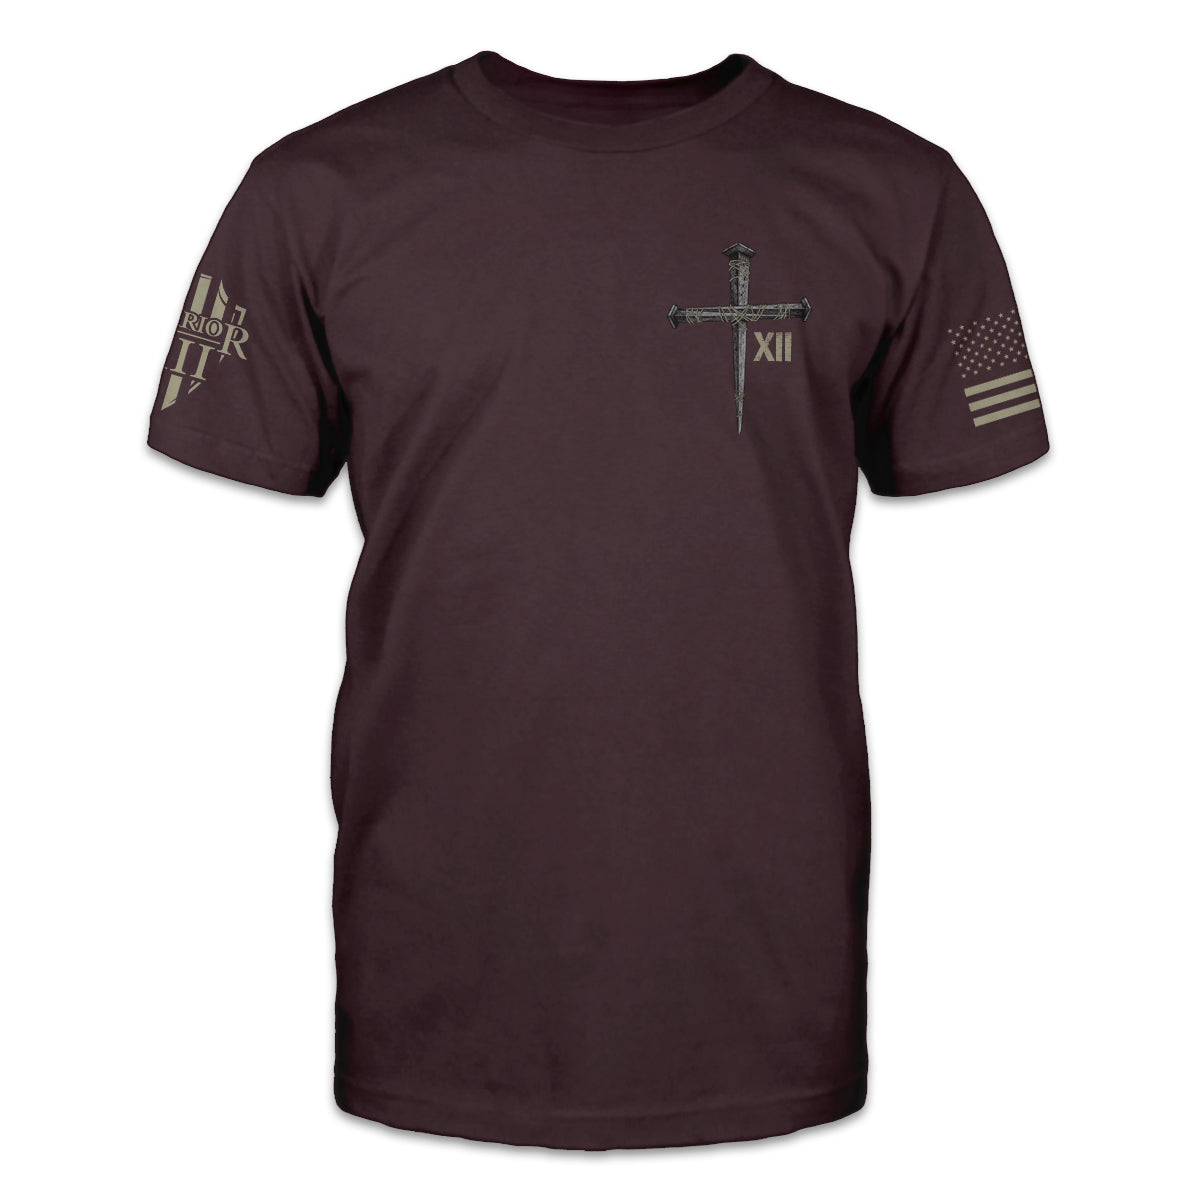 A burgundy t-shirt with a cross printed on the front.